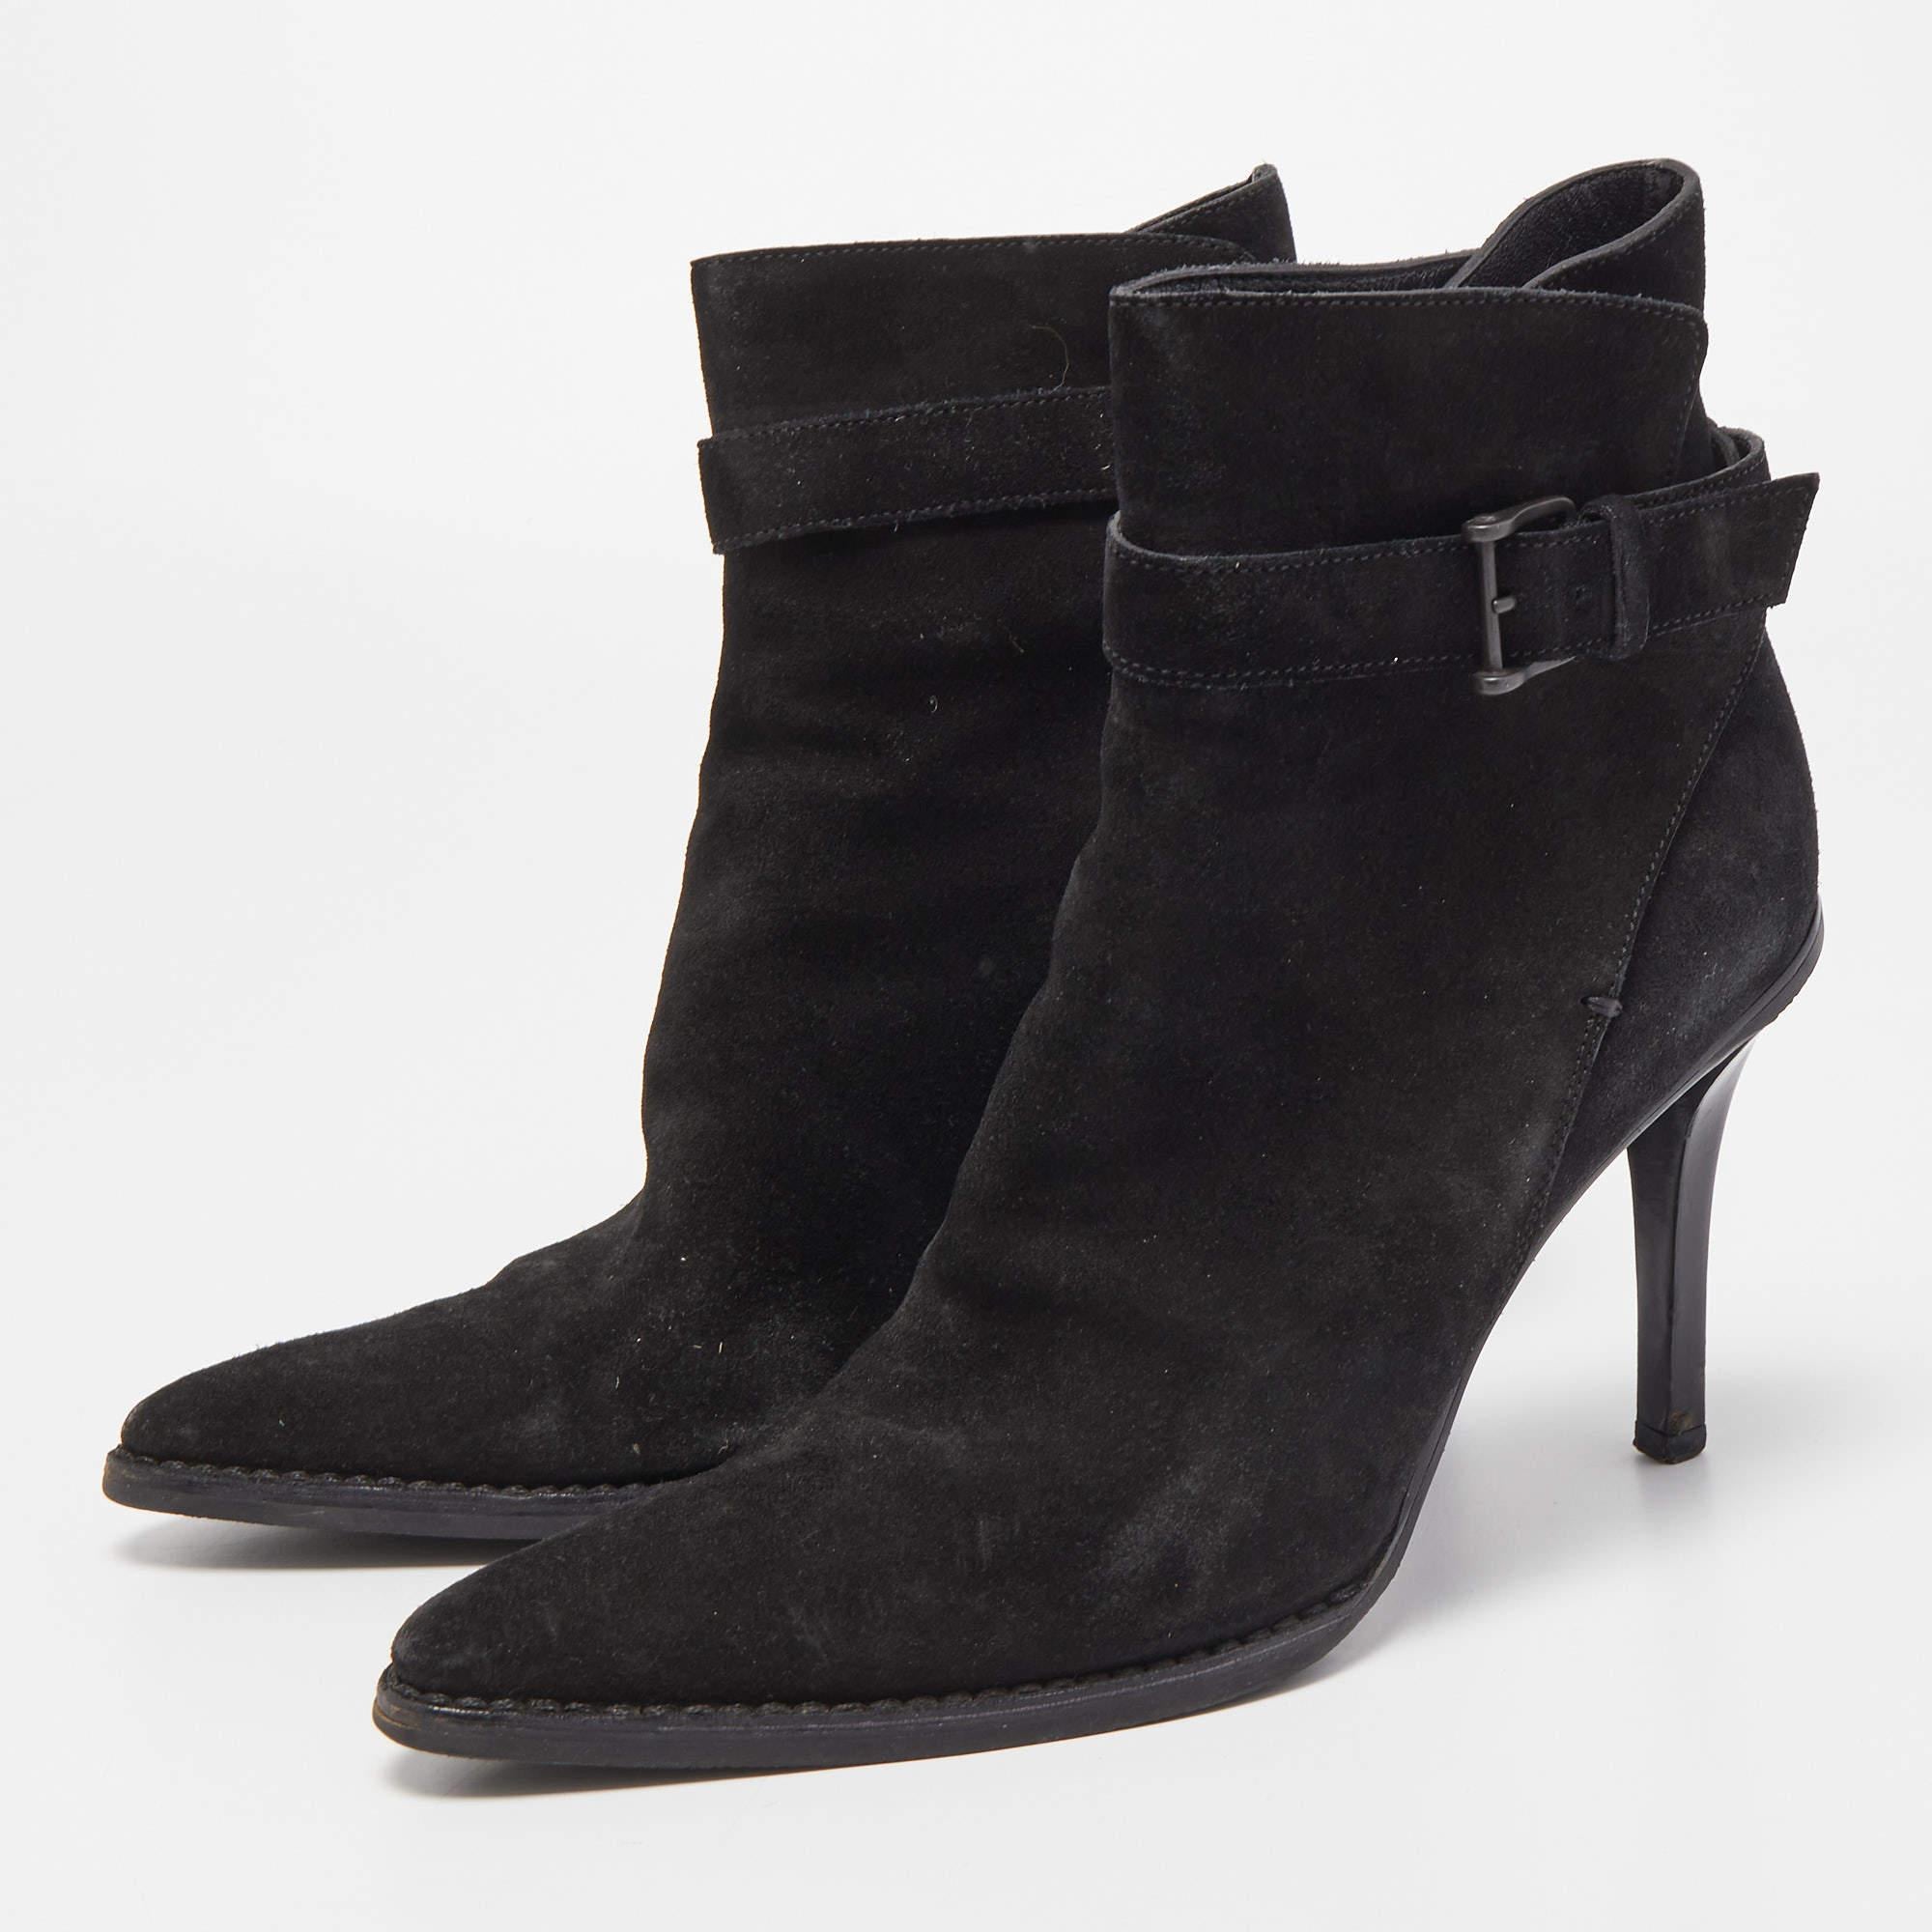 Gucci Black Suede Pointed Toe Ankle Boots Size 39 For Sale 1